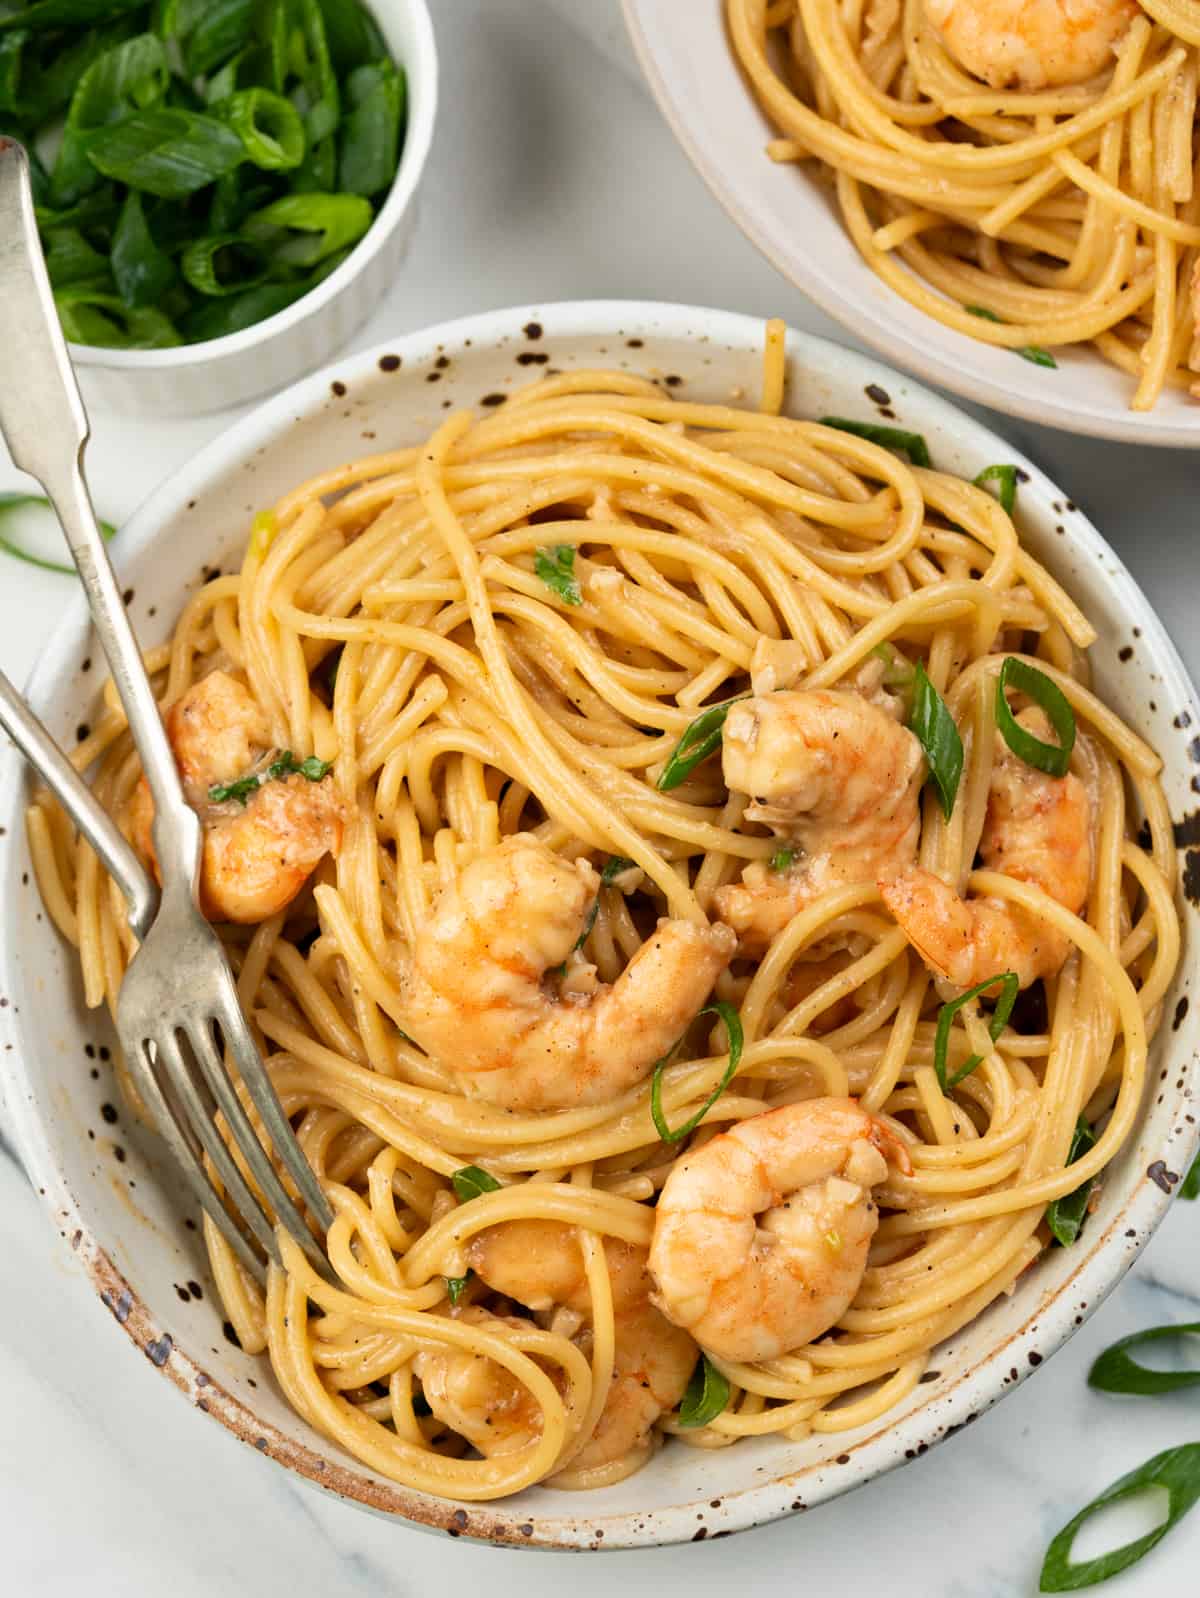 Bowl of Garlic shrimp noodles in Asian inspired butter sauce, juicy shrimps and green onion.